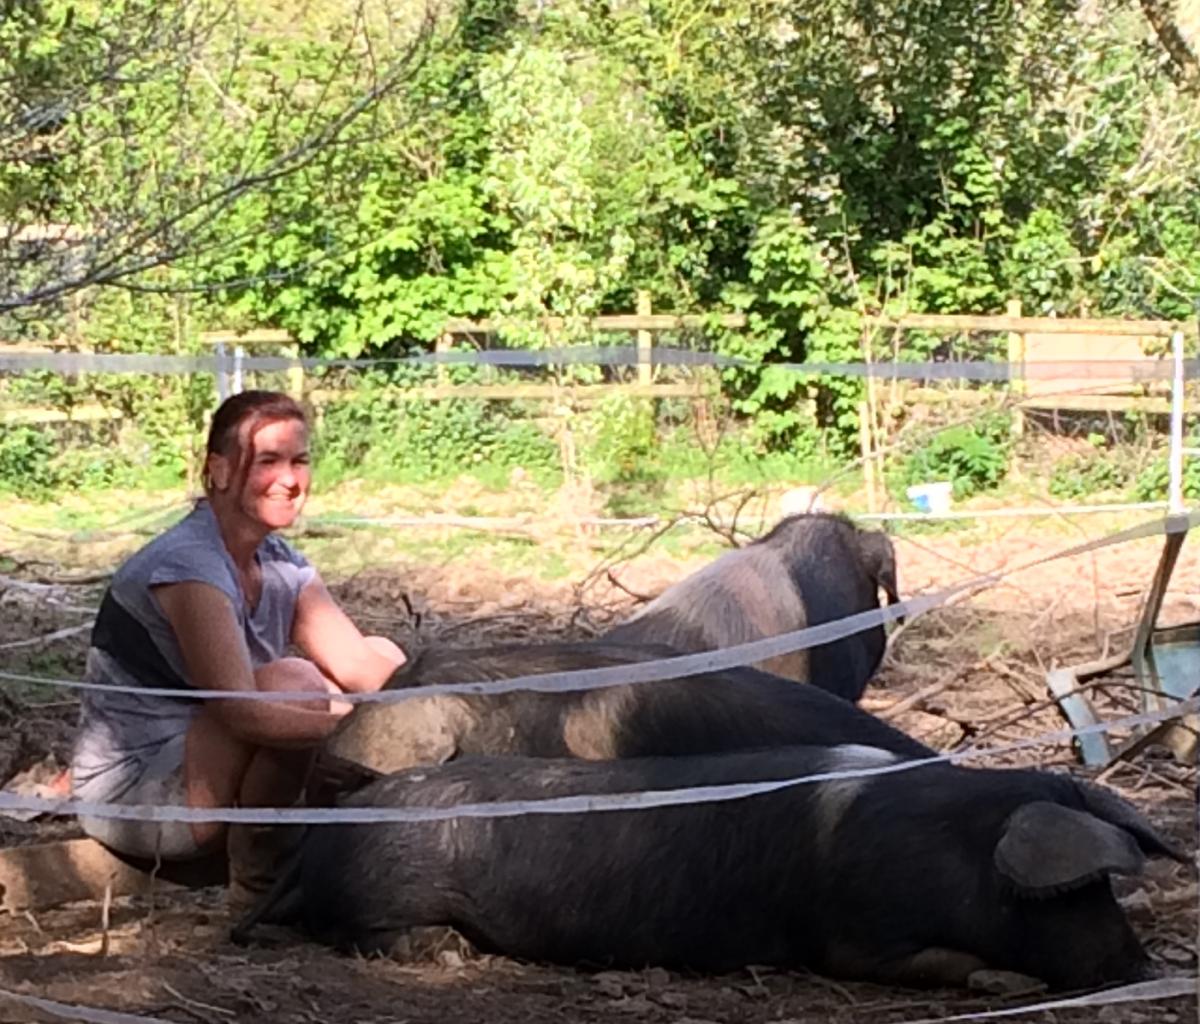 Chris sitting next to three pigs, Flora, Fauna and Fabulous